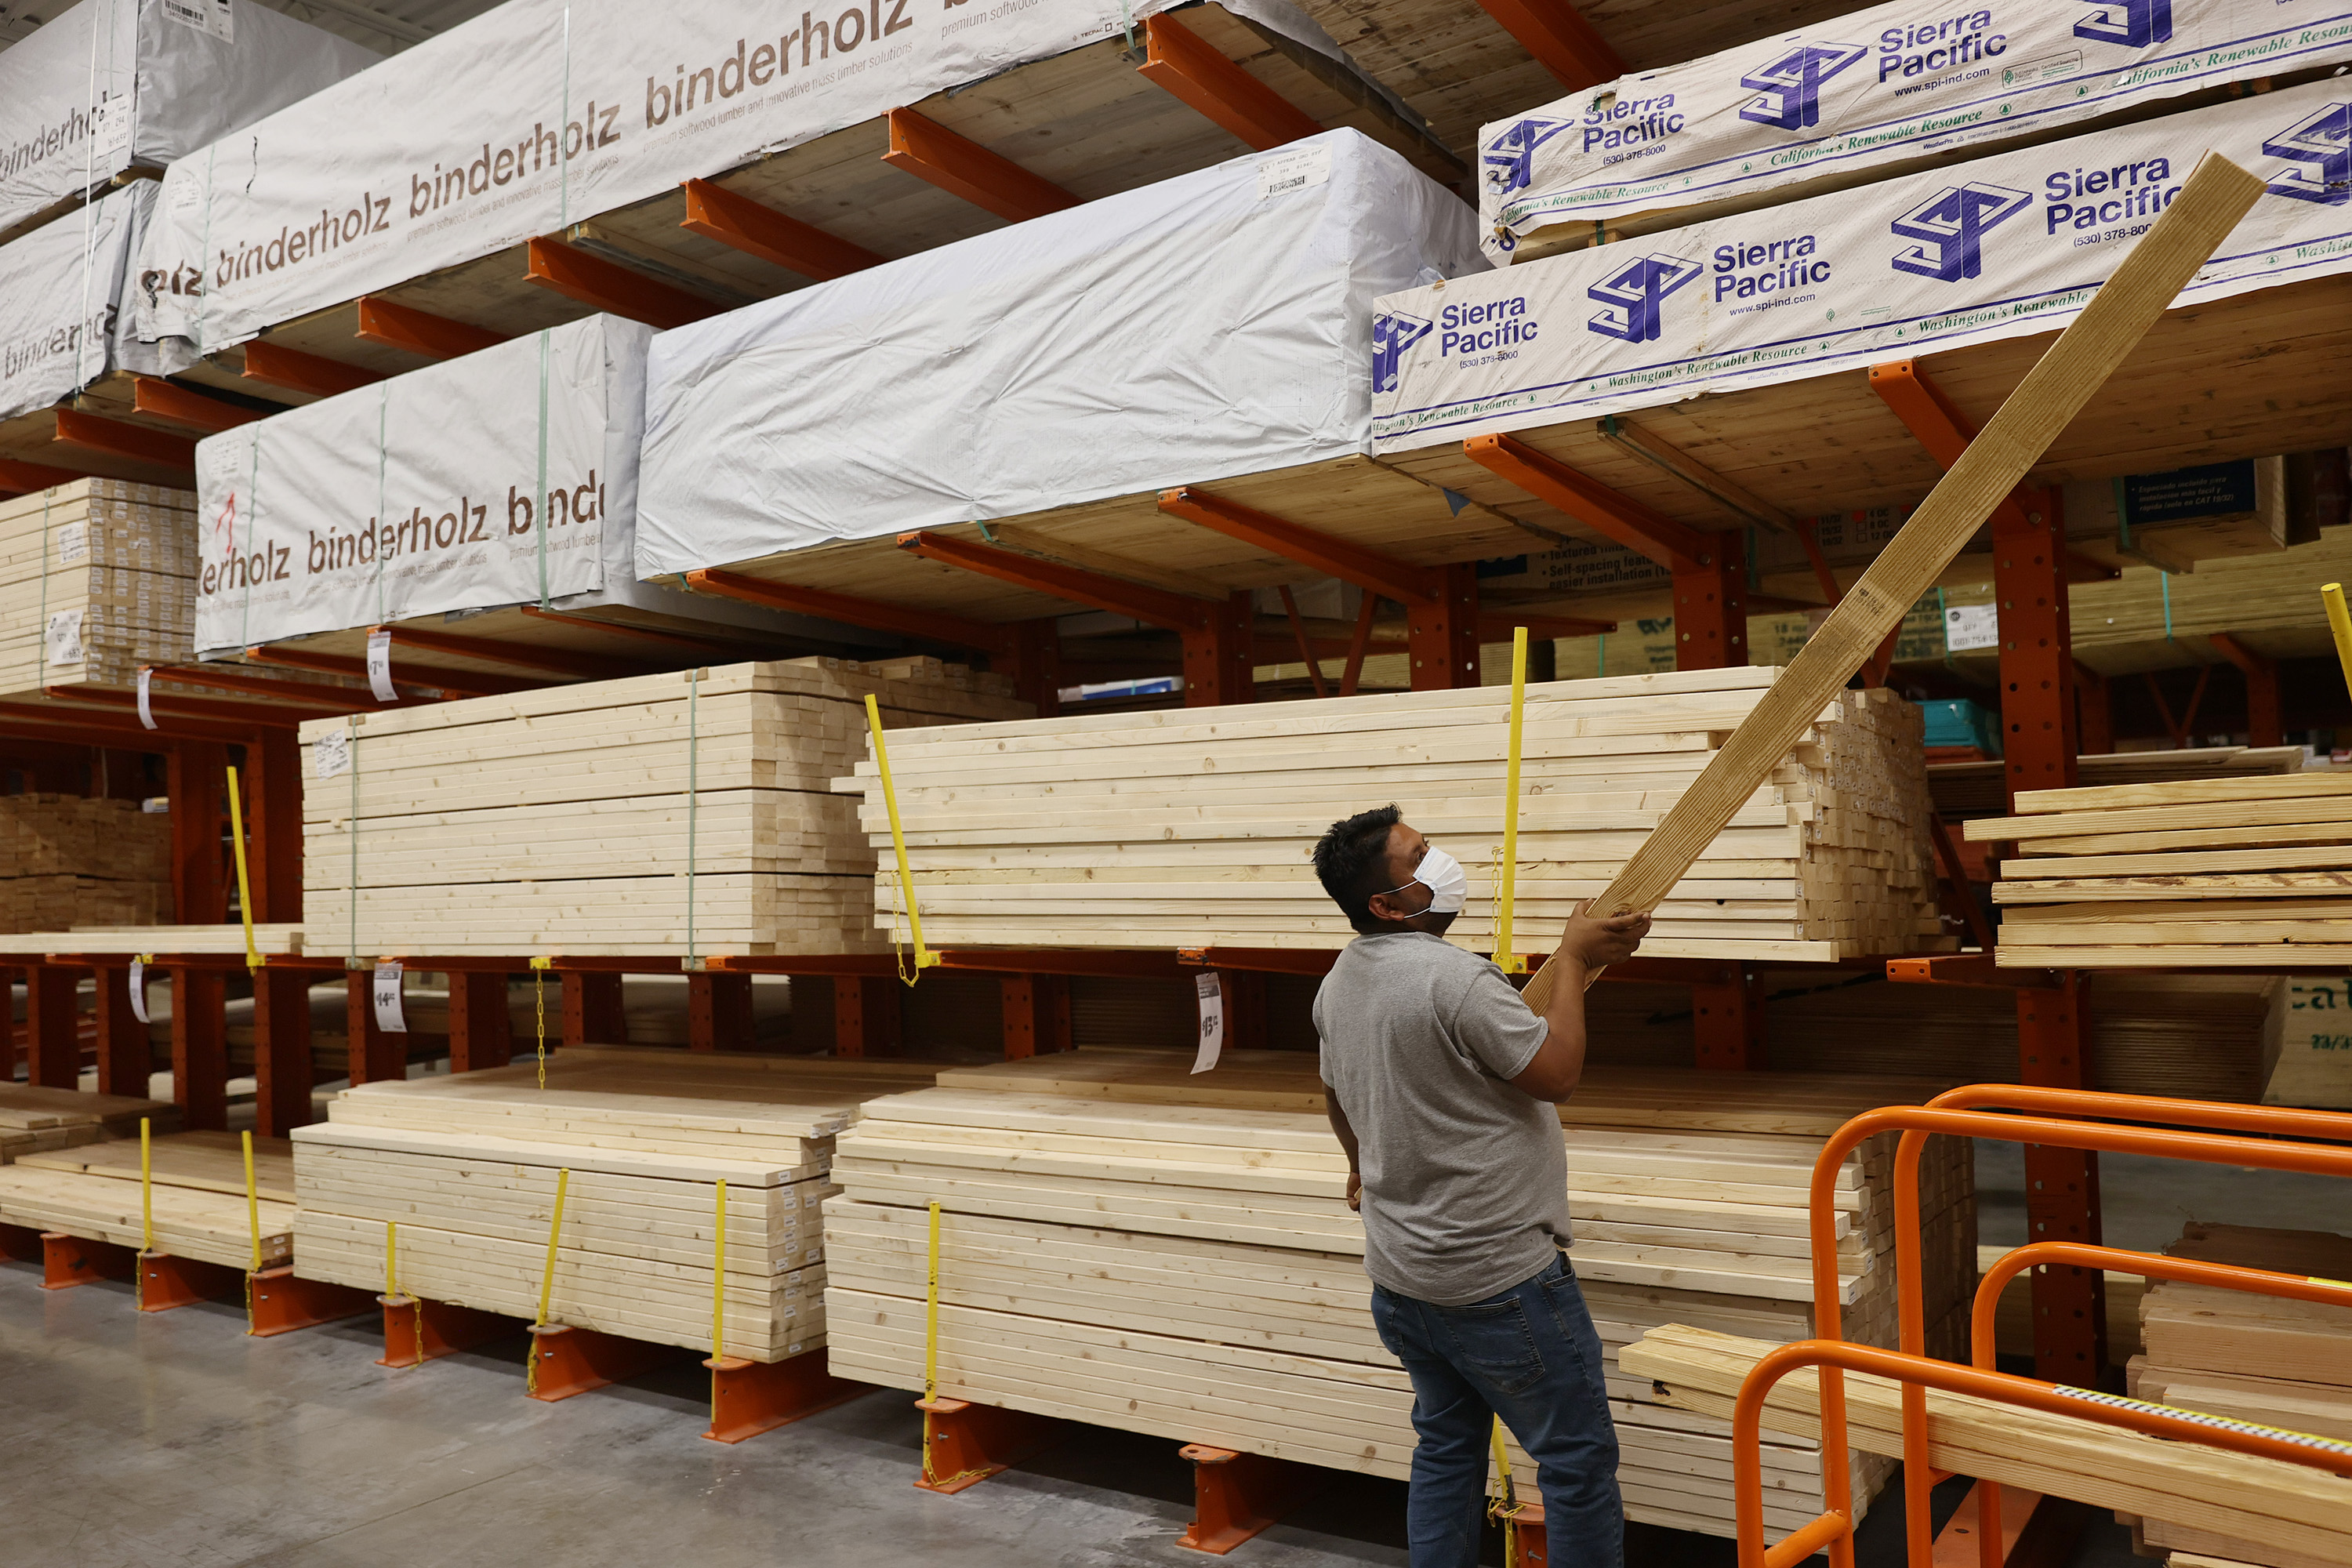 Exorcism for Lumber in Home Depot Aisle Prompts Group's Removal